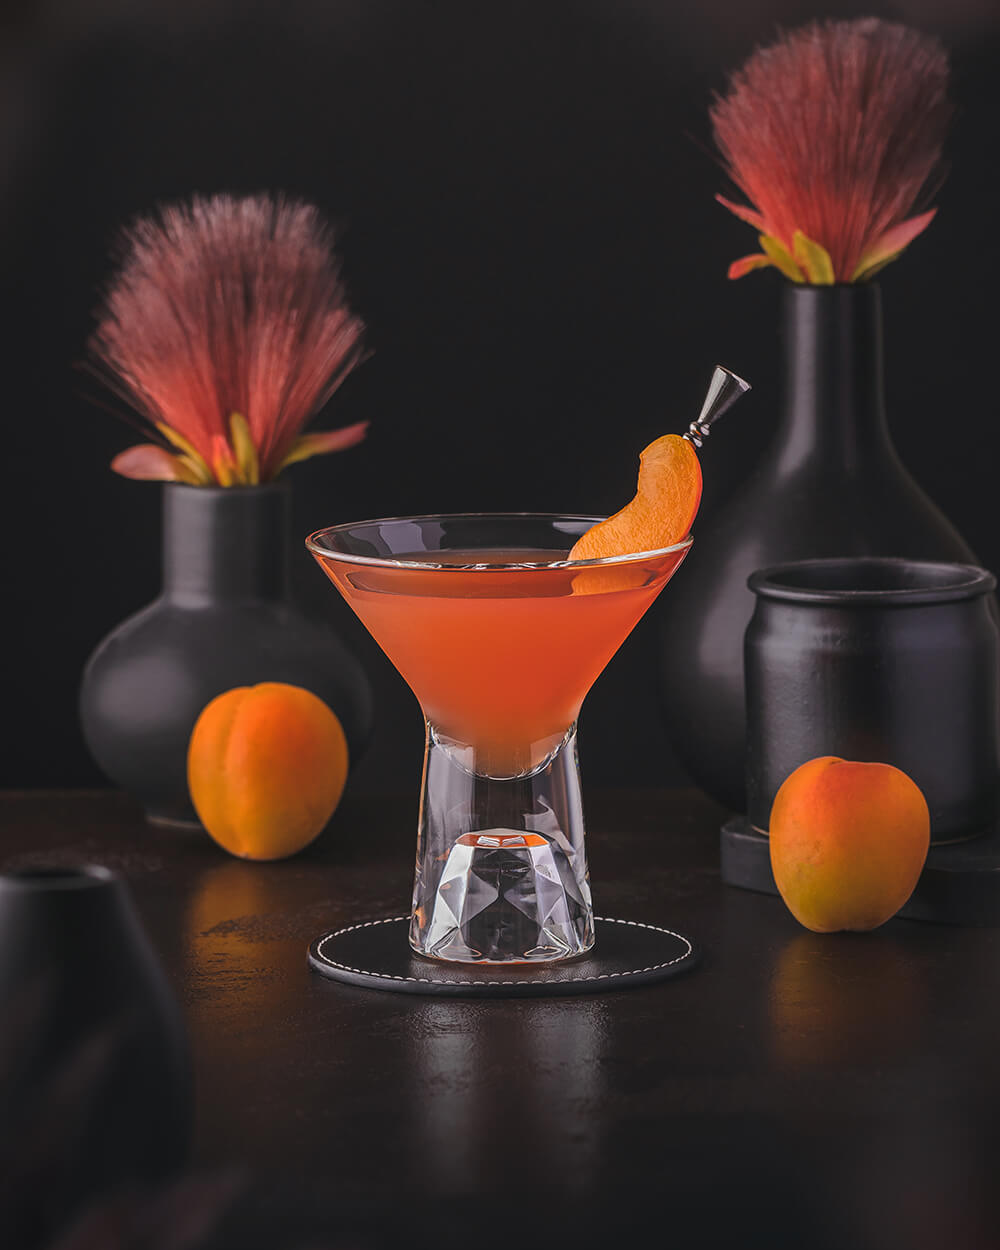 Charlie Chaplin Cocktail - Orange red classic cocktail made with sloe gin, apricot liqueur and lime juice. Garnished with an apricot wedge.